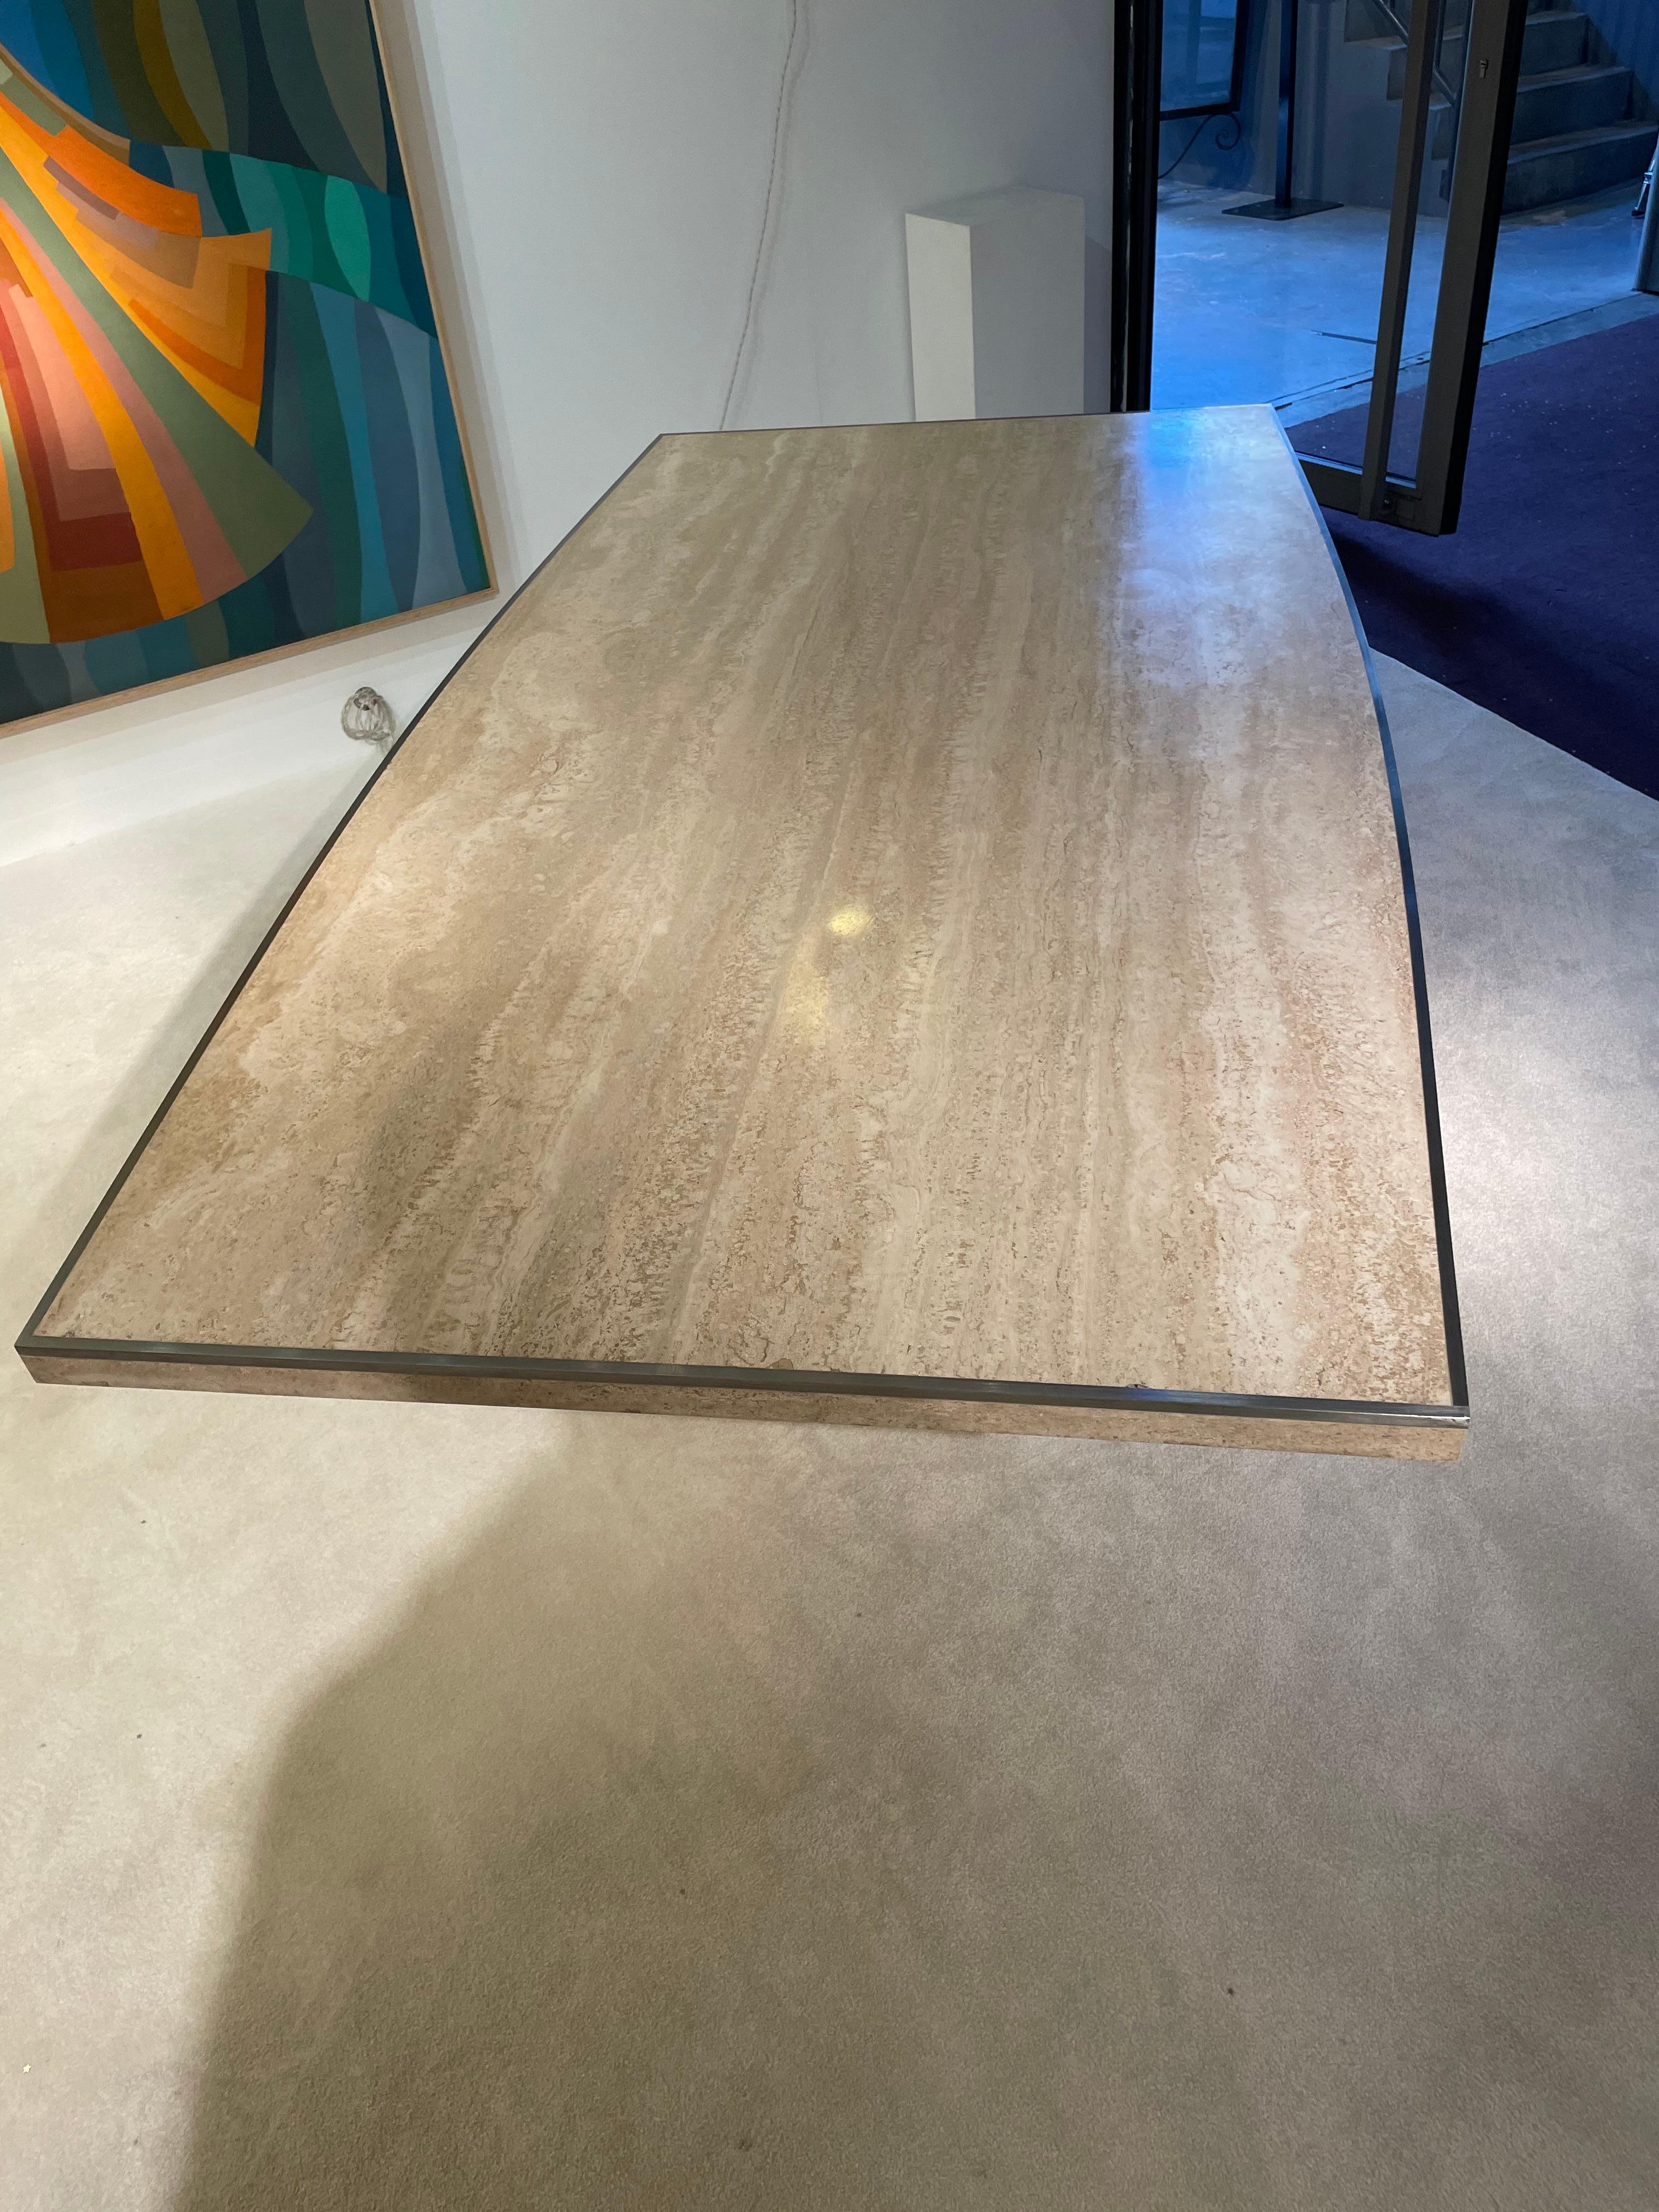 Travertine Dining Table by Willy Rizzo